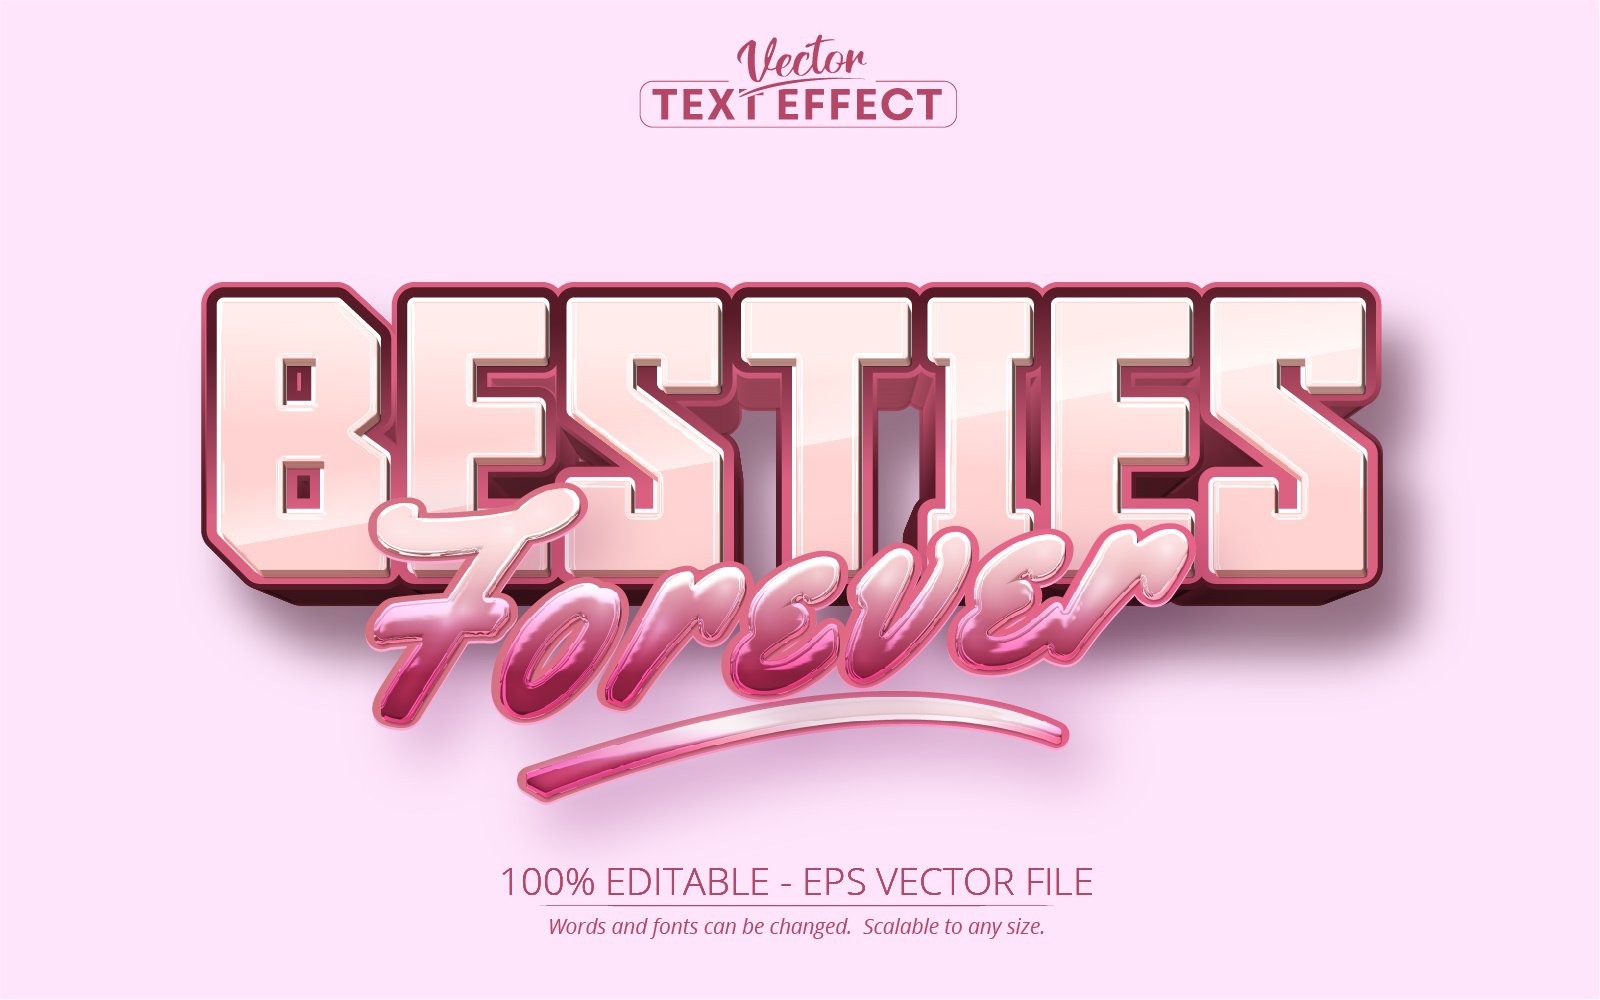 Besties Forever - Editable Text Effect, Blue And Pink Cartoon Text Style, Graphics Illustration